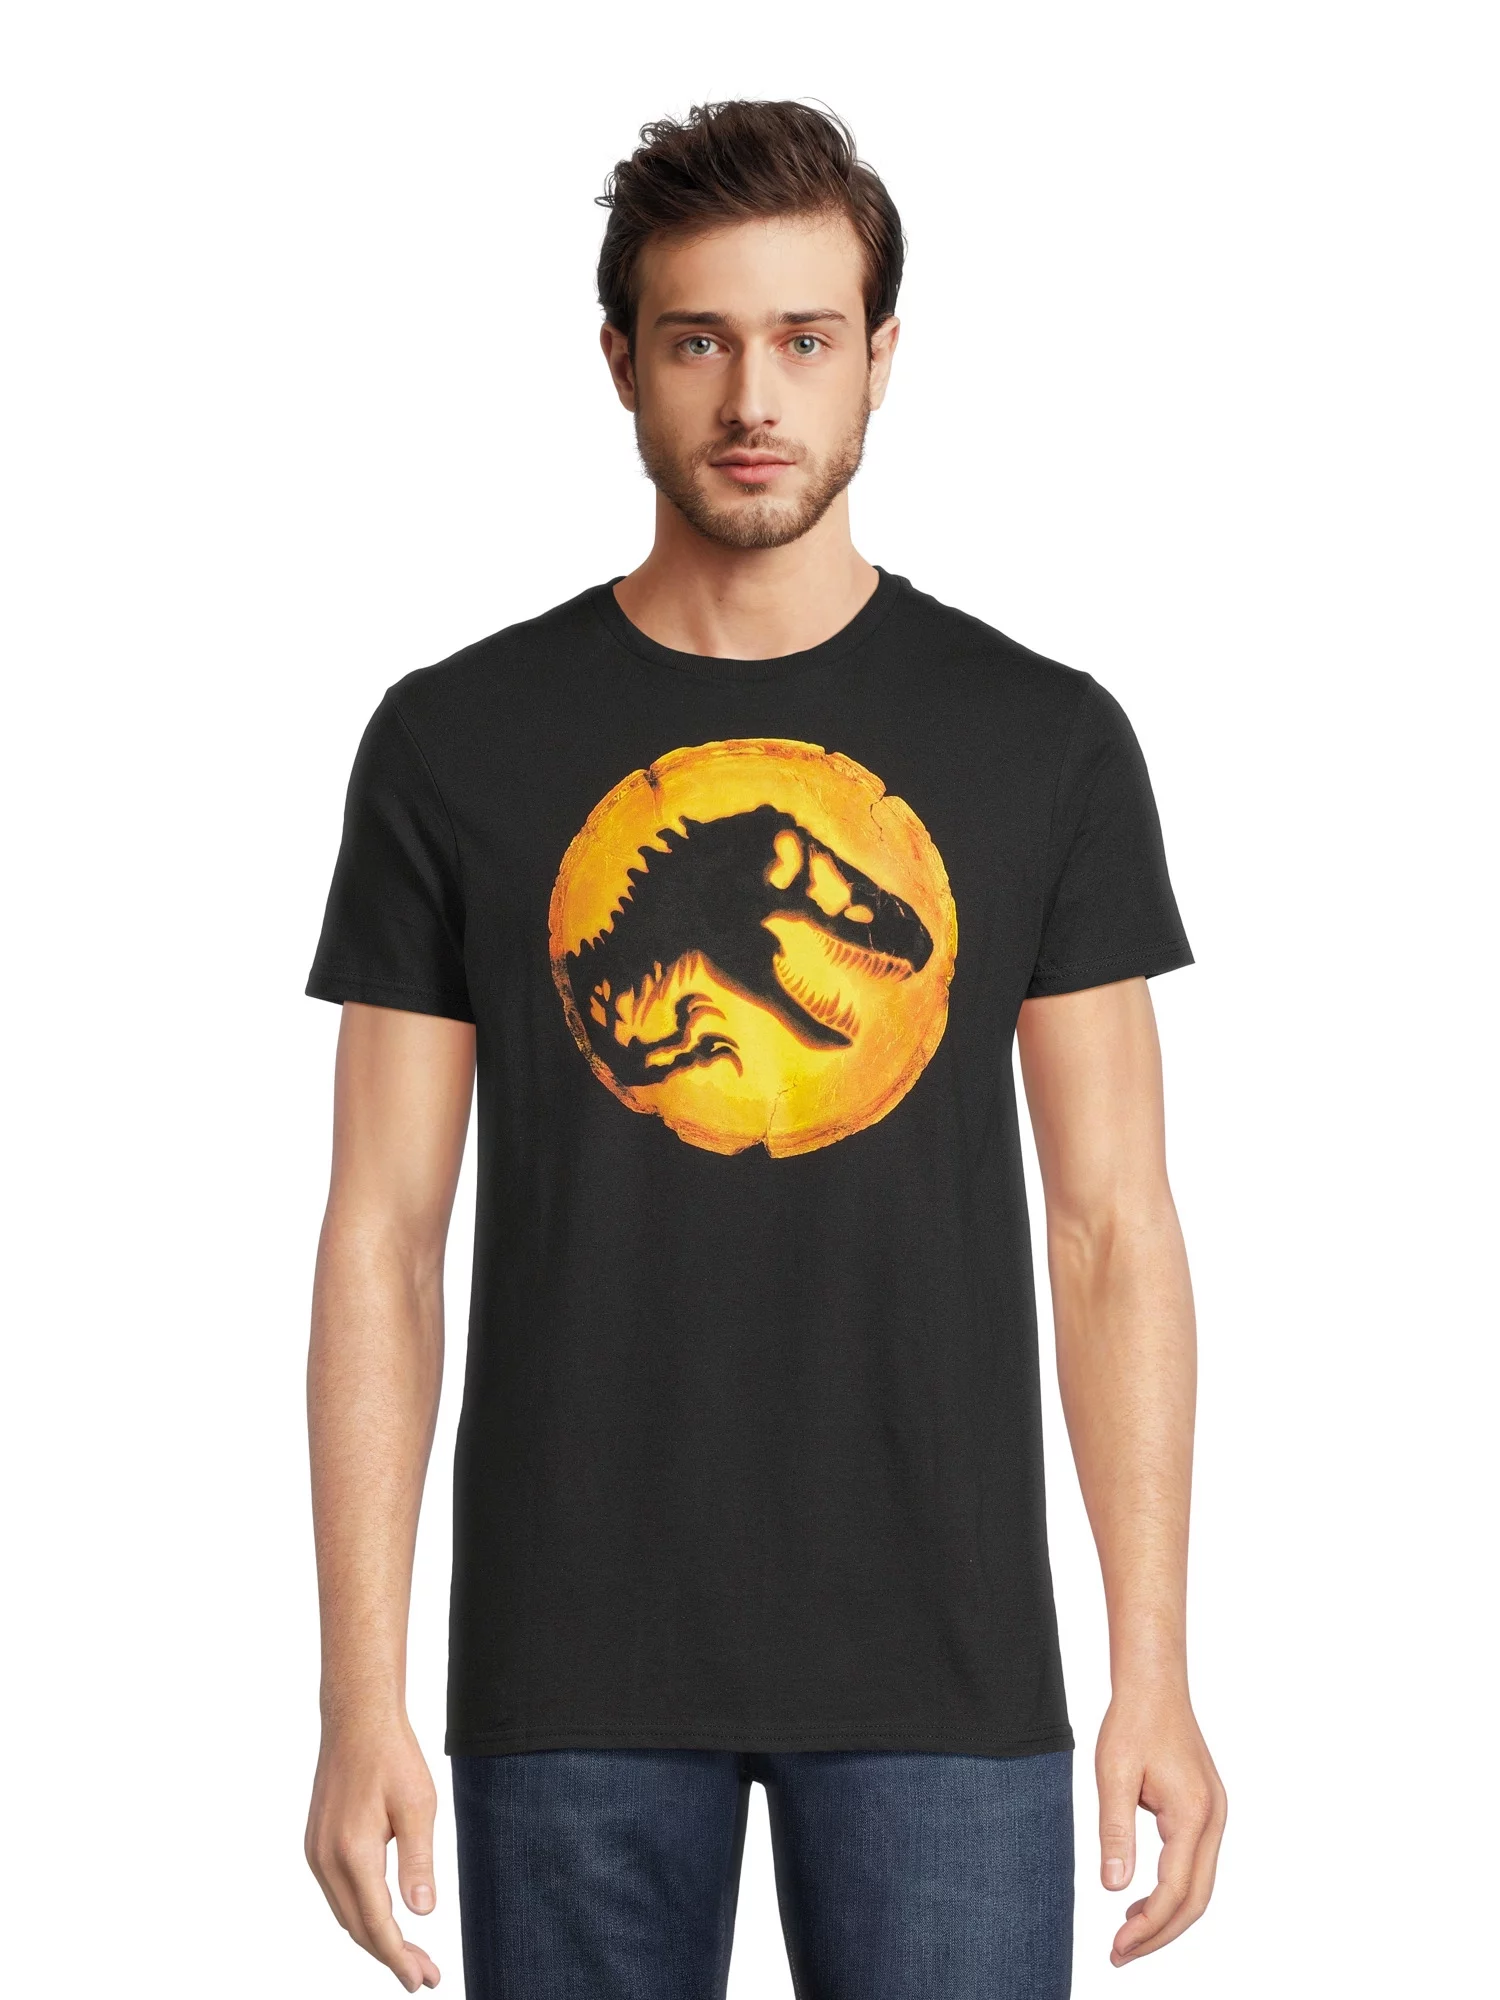 Jurassic Park Men's Coin Amber Graphic Tee with Short Sleeves, Size S-3XL